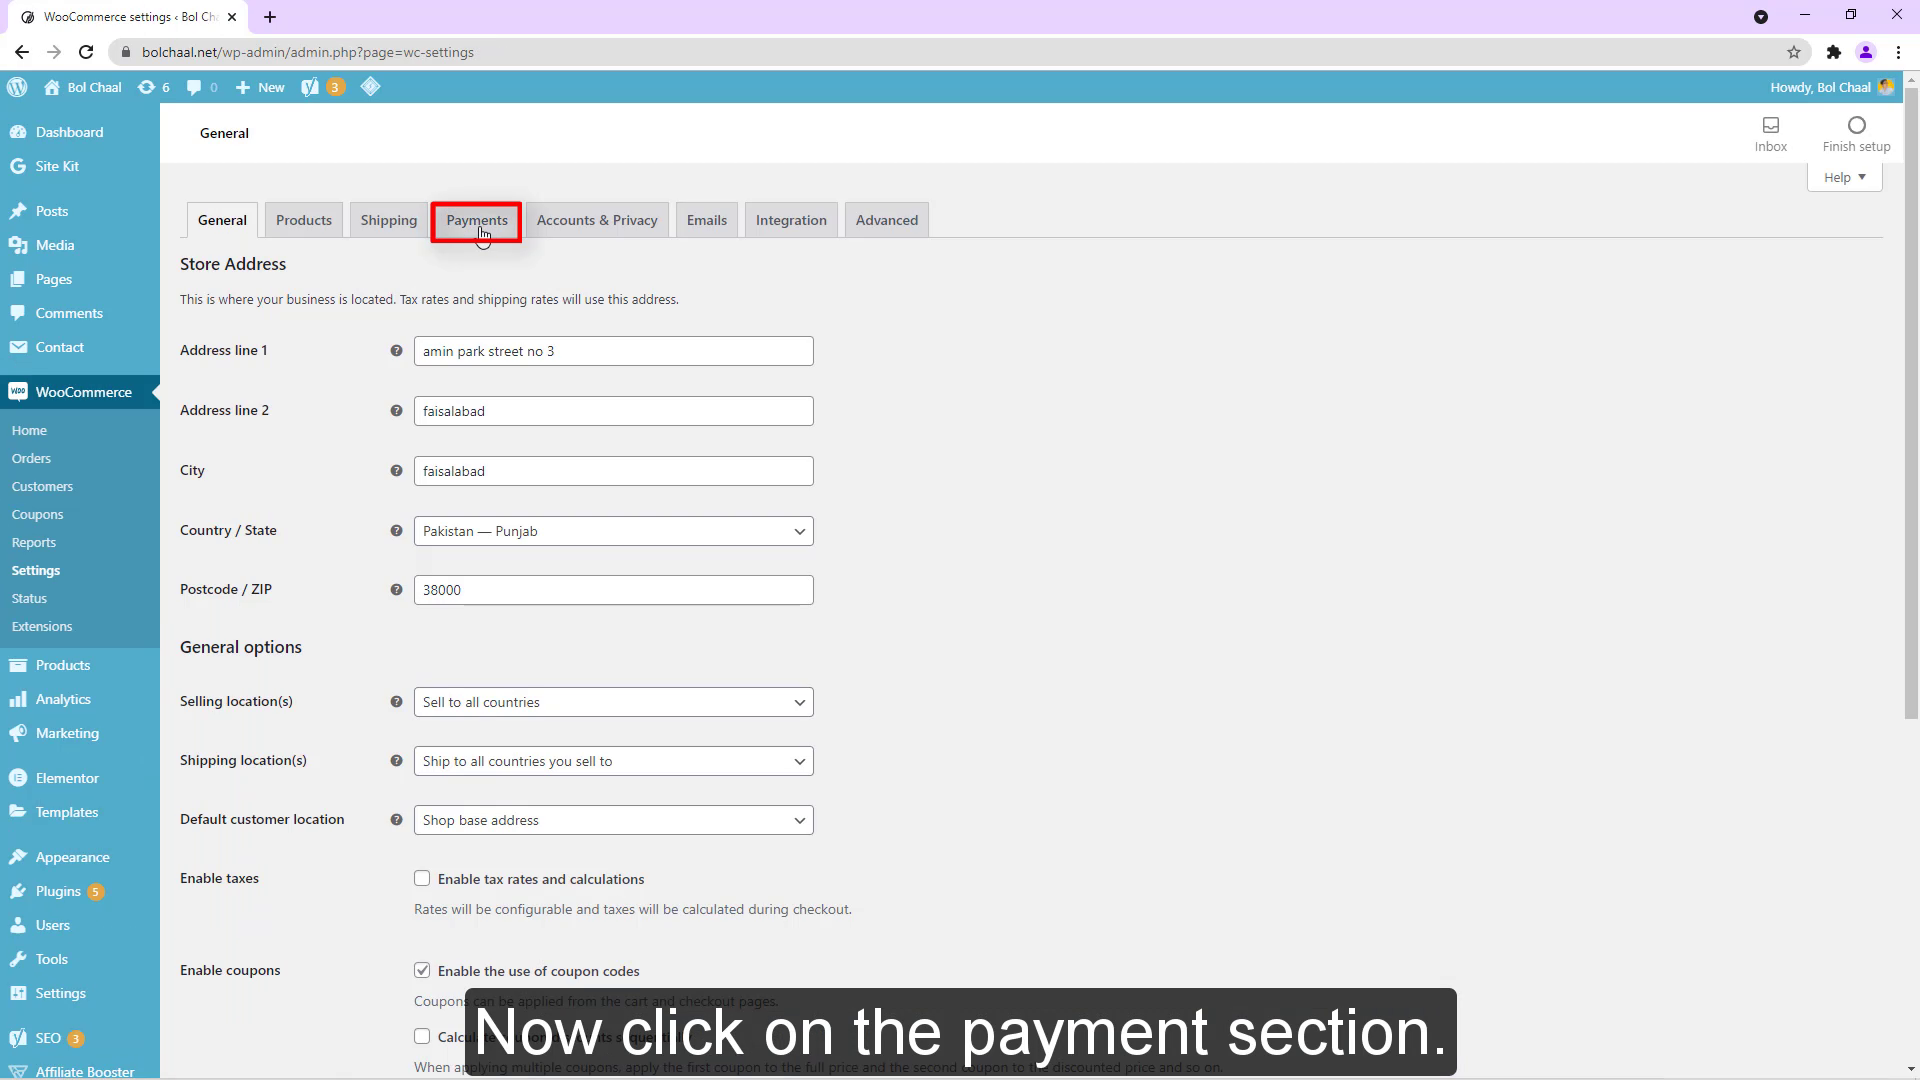 Now click on the payment section.